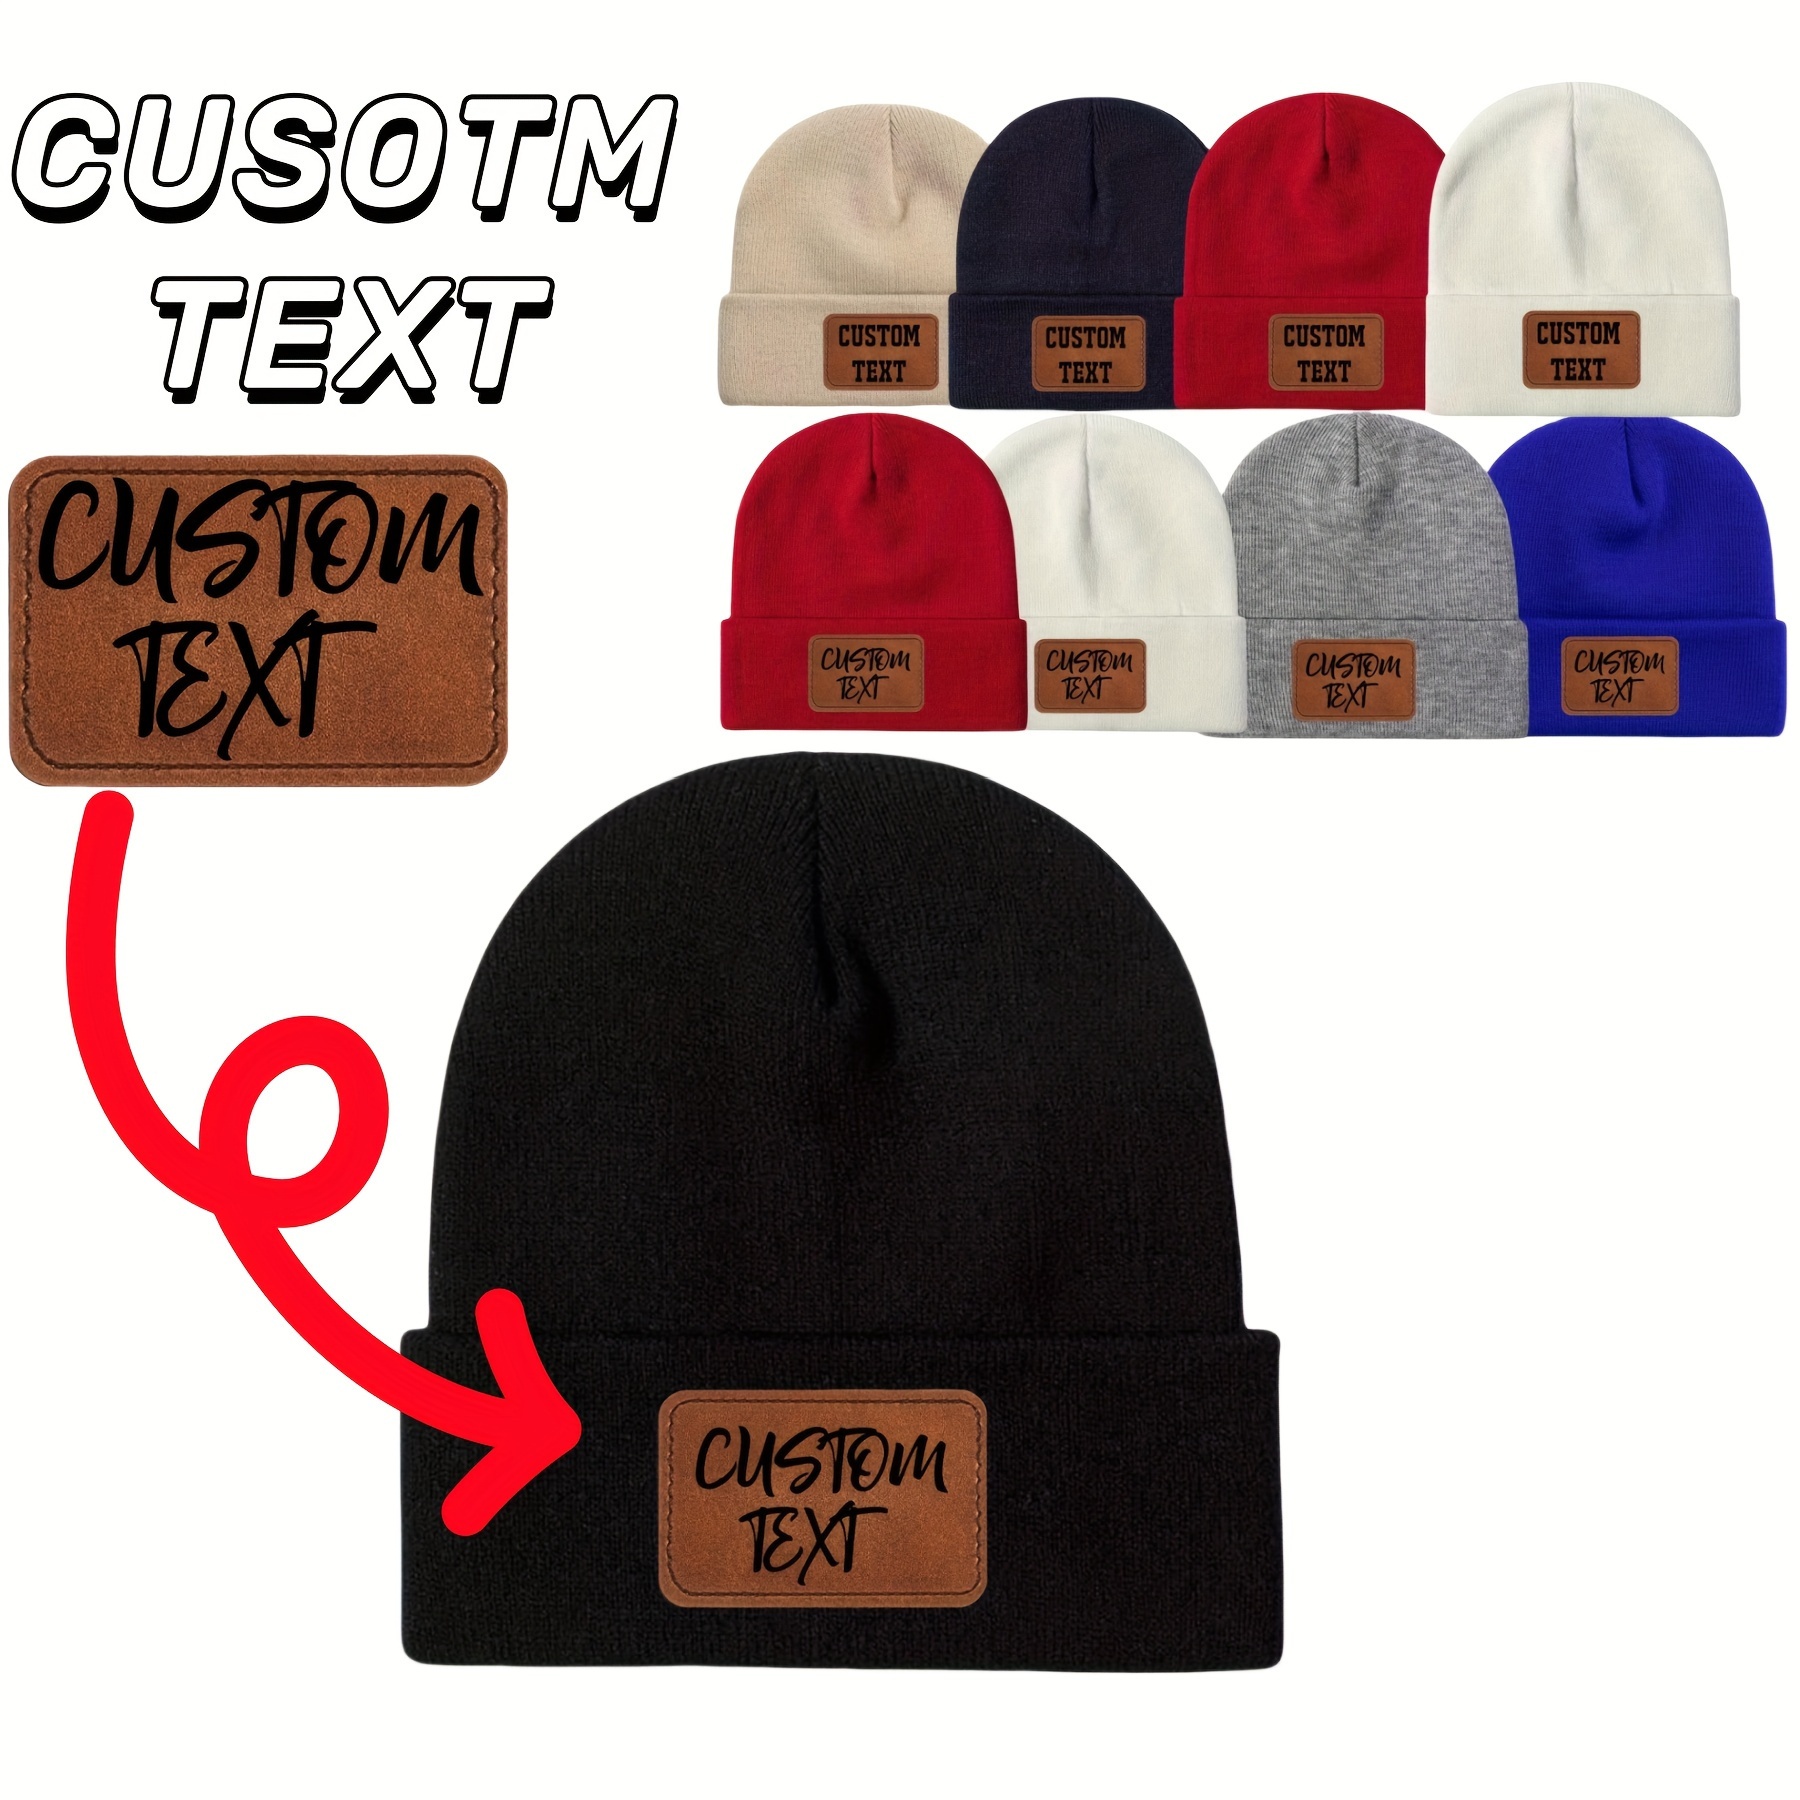 

Custom Text Knit Skullies & Beanies - Stretchable & Insulating Unisex Cotton Blend Cap With Personalized Patch Design - Lightweight, Comfortable Cuffed Winter Hat For Men And Women